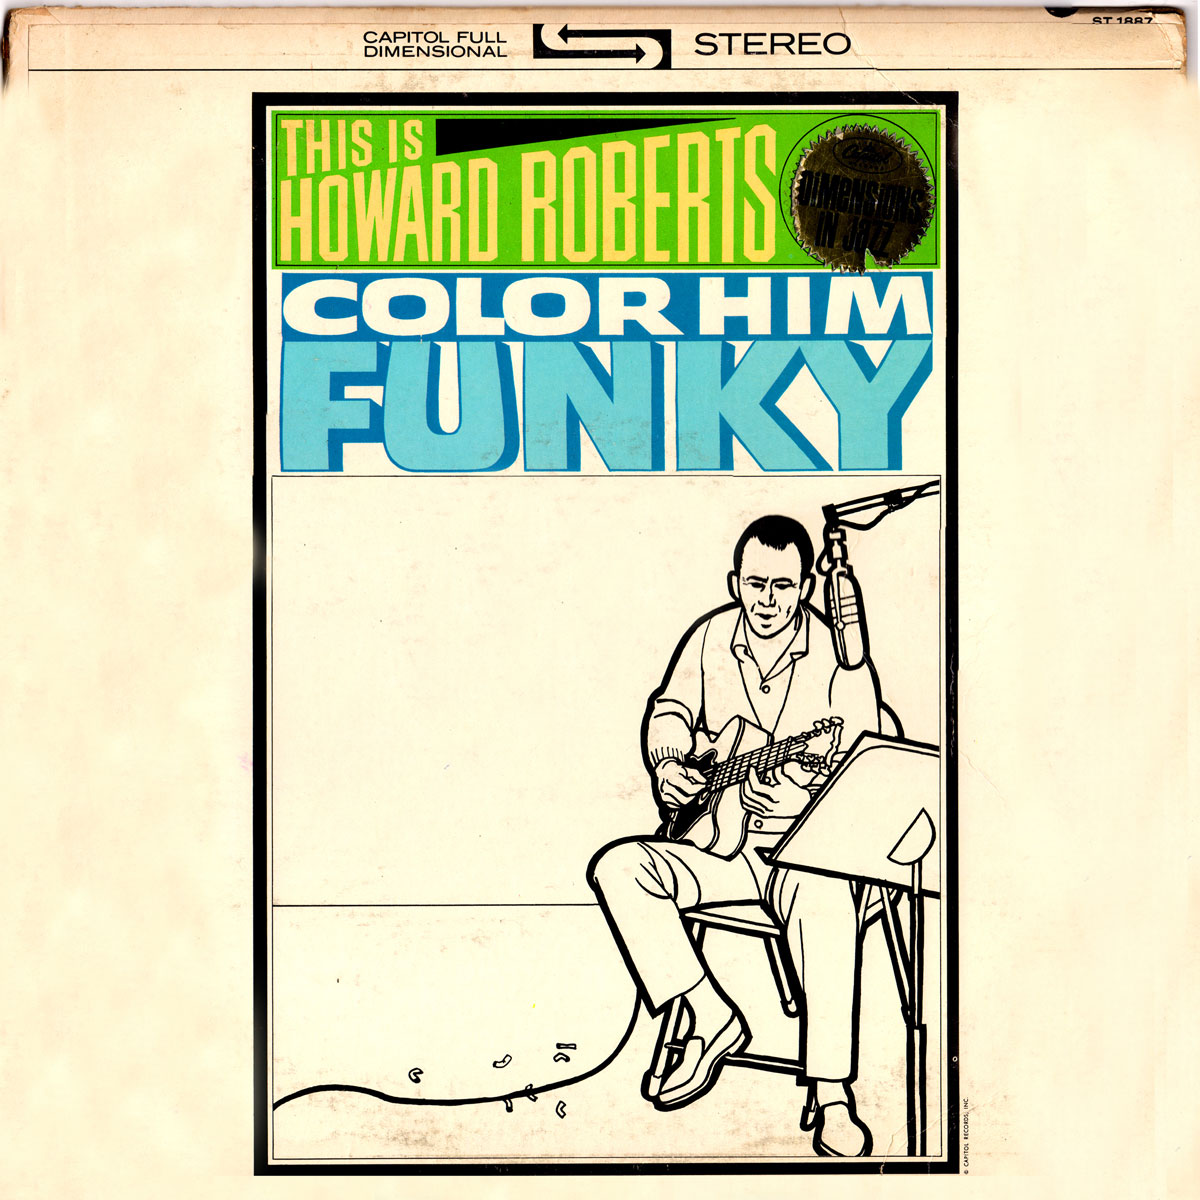 Howard Roberts - This is Howard Roberts / Color Him Funky - Front cover